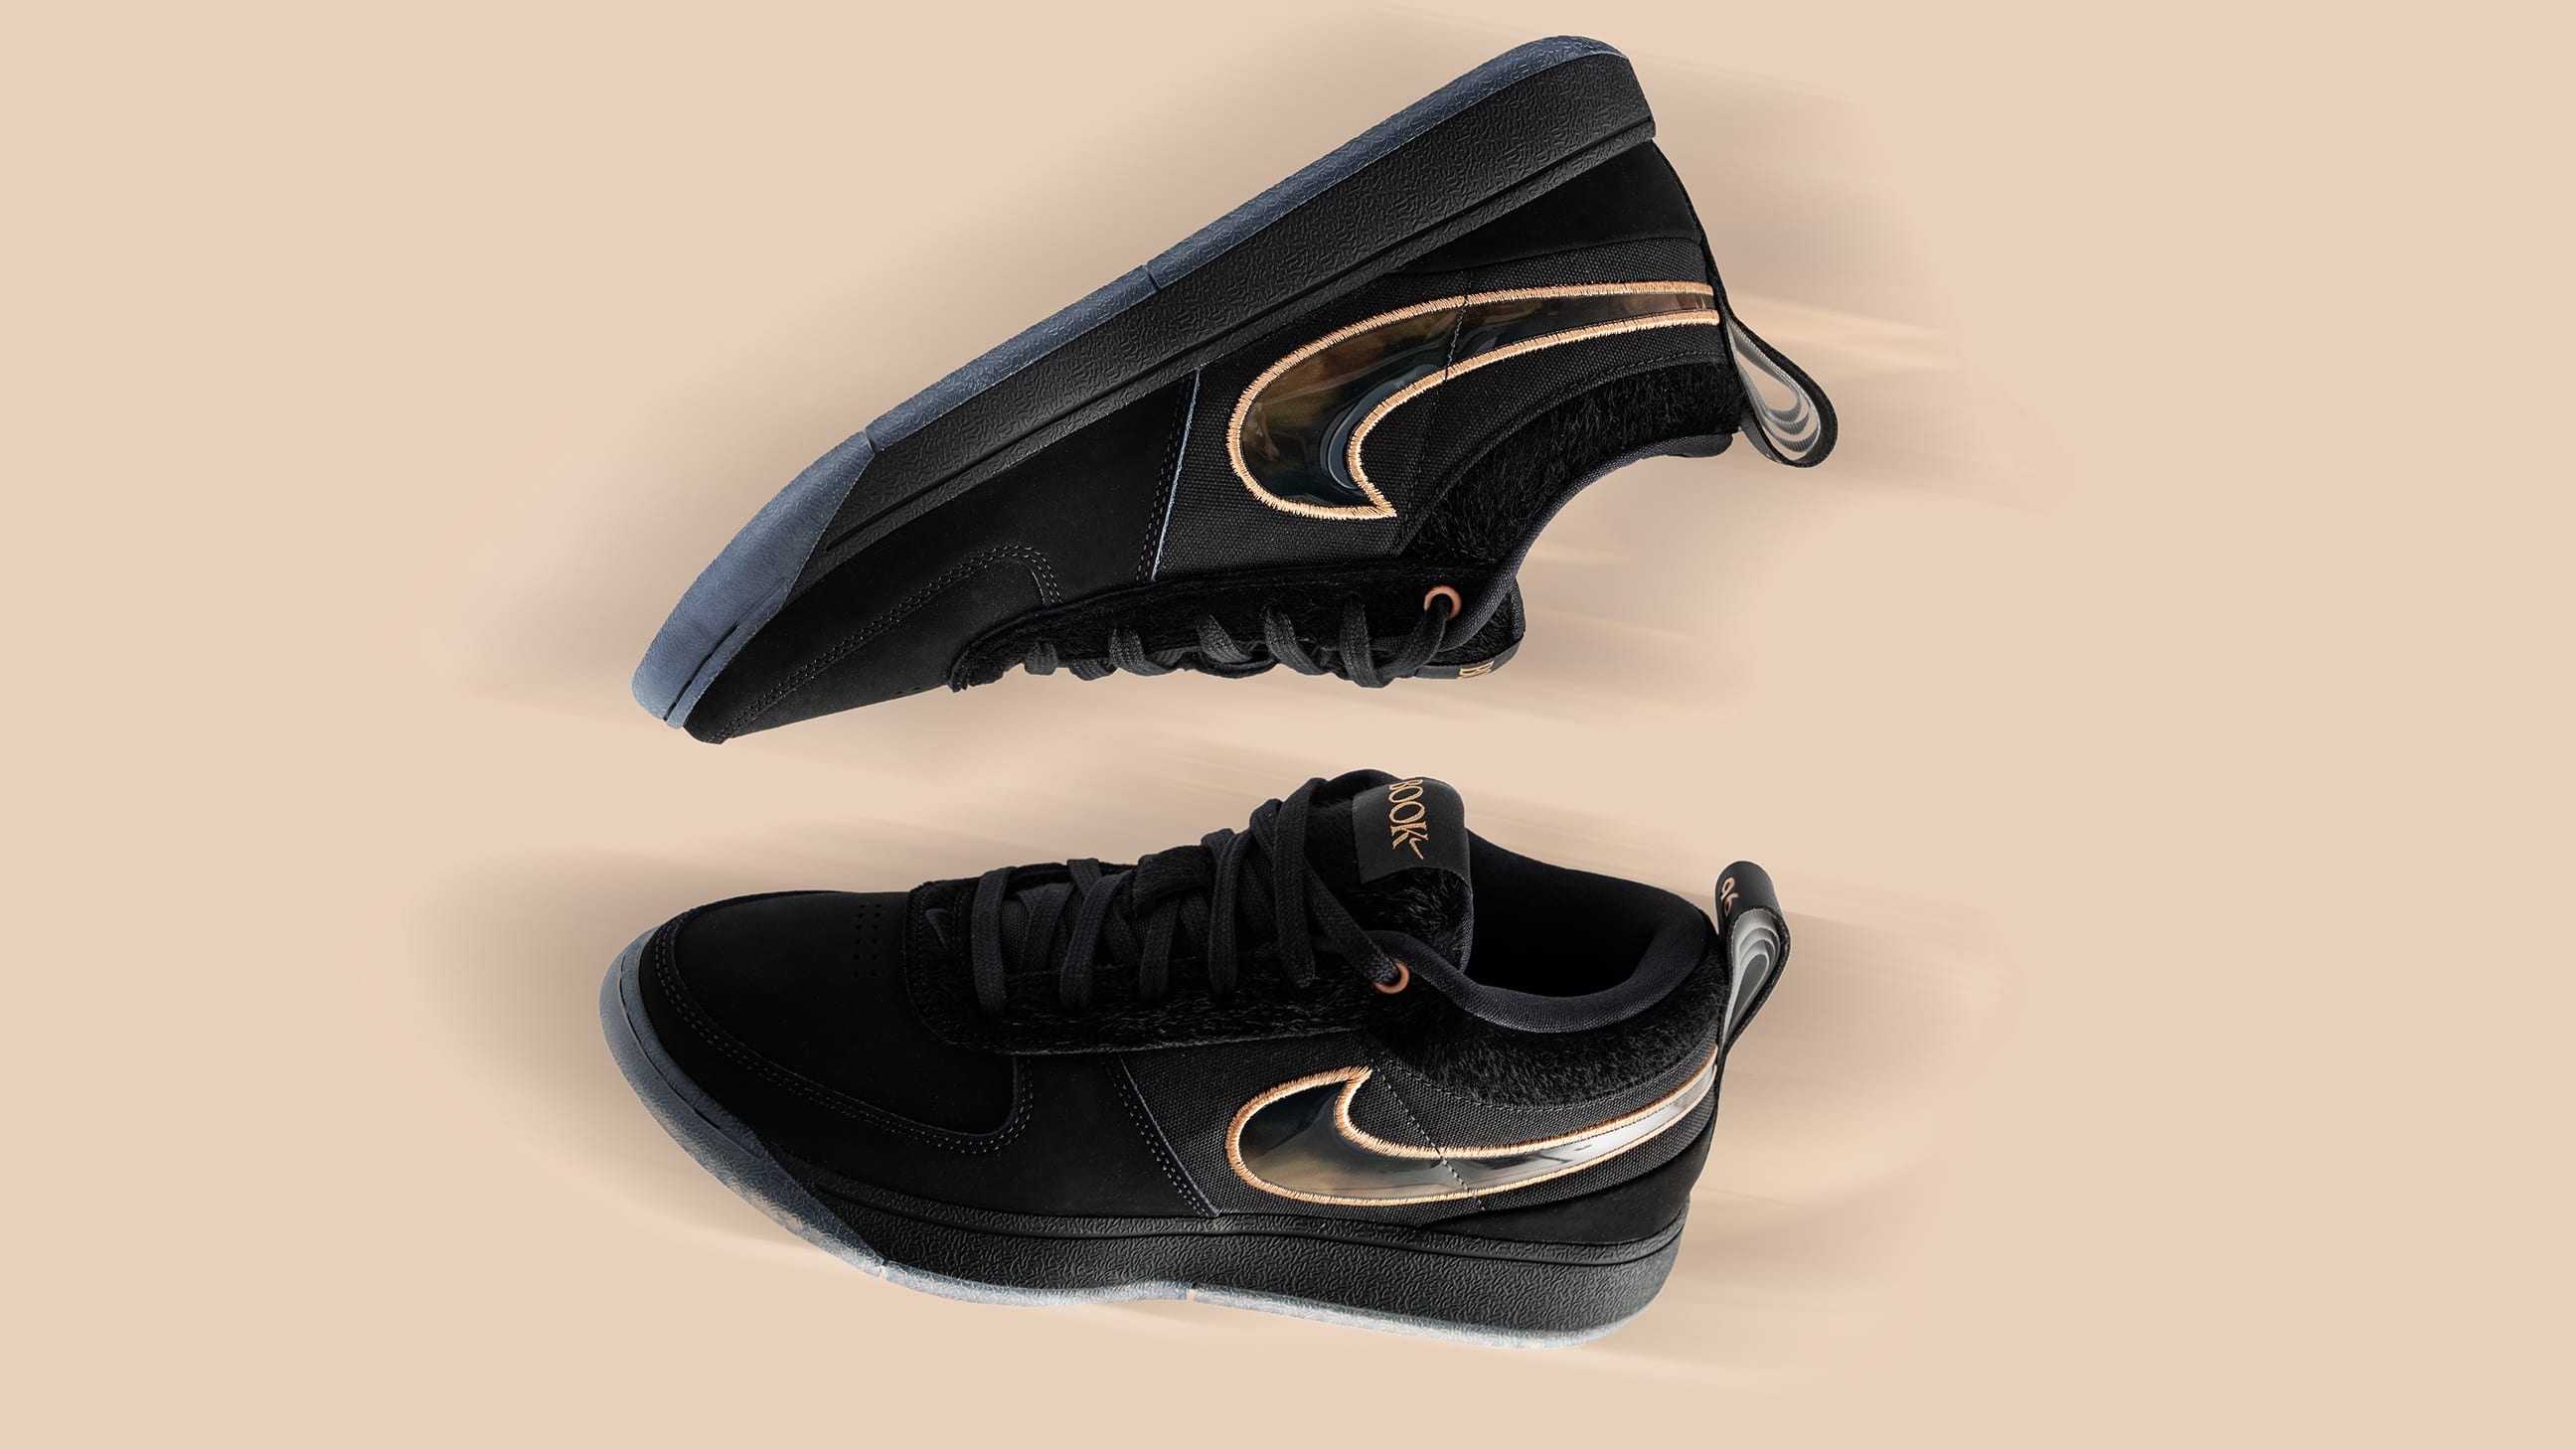 Side view of Devin Booker's black and bronze Nike sneakers.